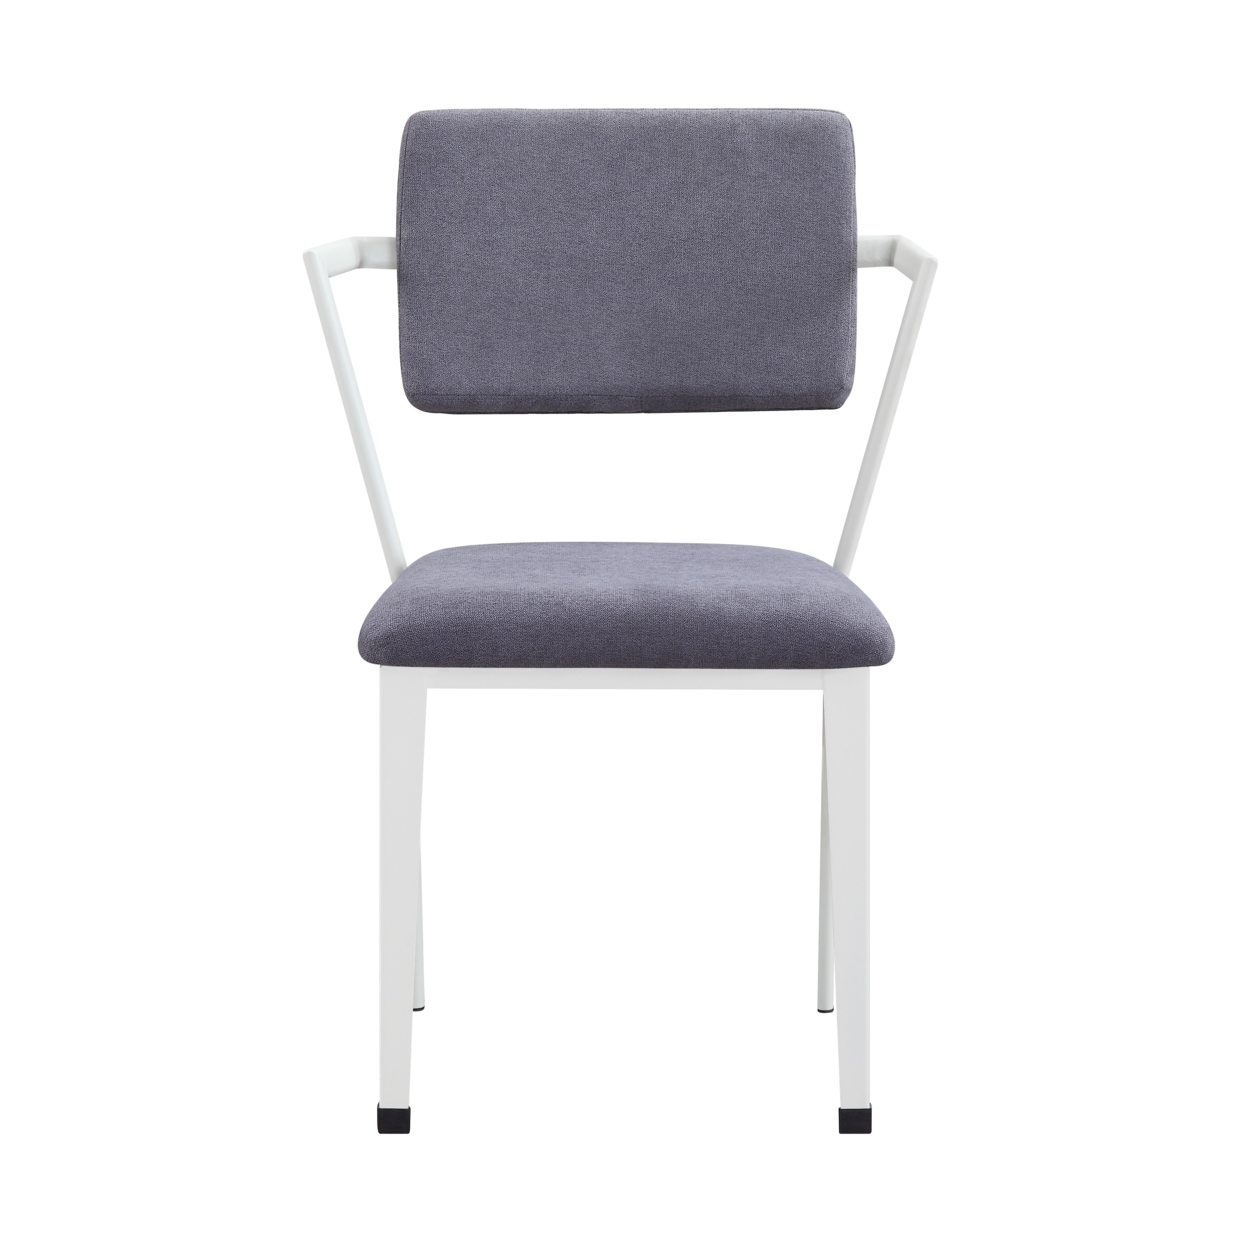 Metal Chair With Fabric Upholstery And Straight Legs, Gray And White- Saltoro Sherpi